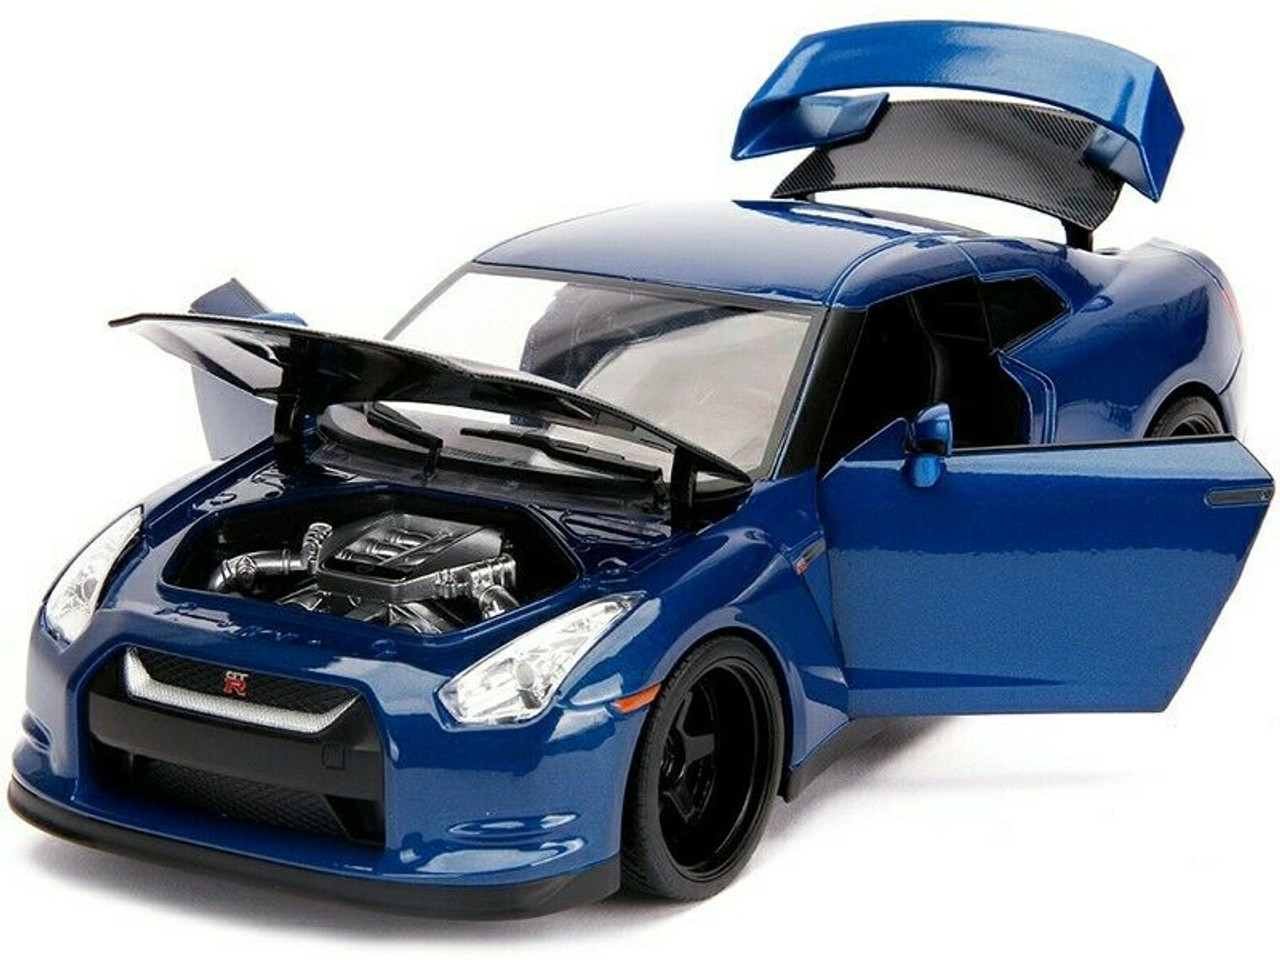 1/18 Jada 2009 Nissan GT-R R35 (Blue Metallic and Carbon) with Lights and Brian Figurine "Fast & Furious" Movie Diecast Model Car